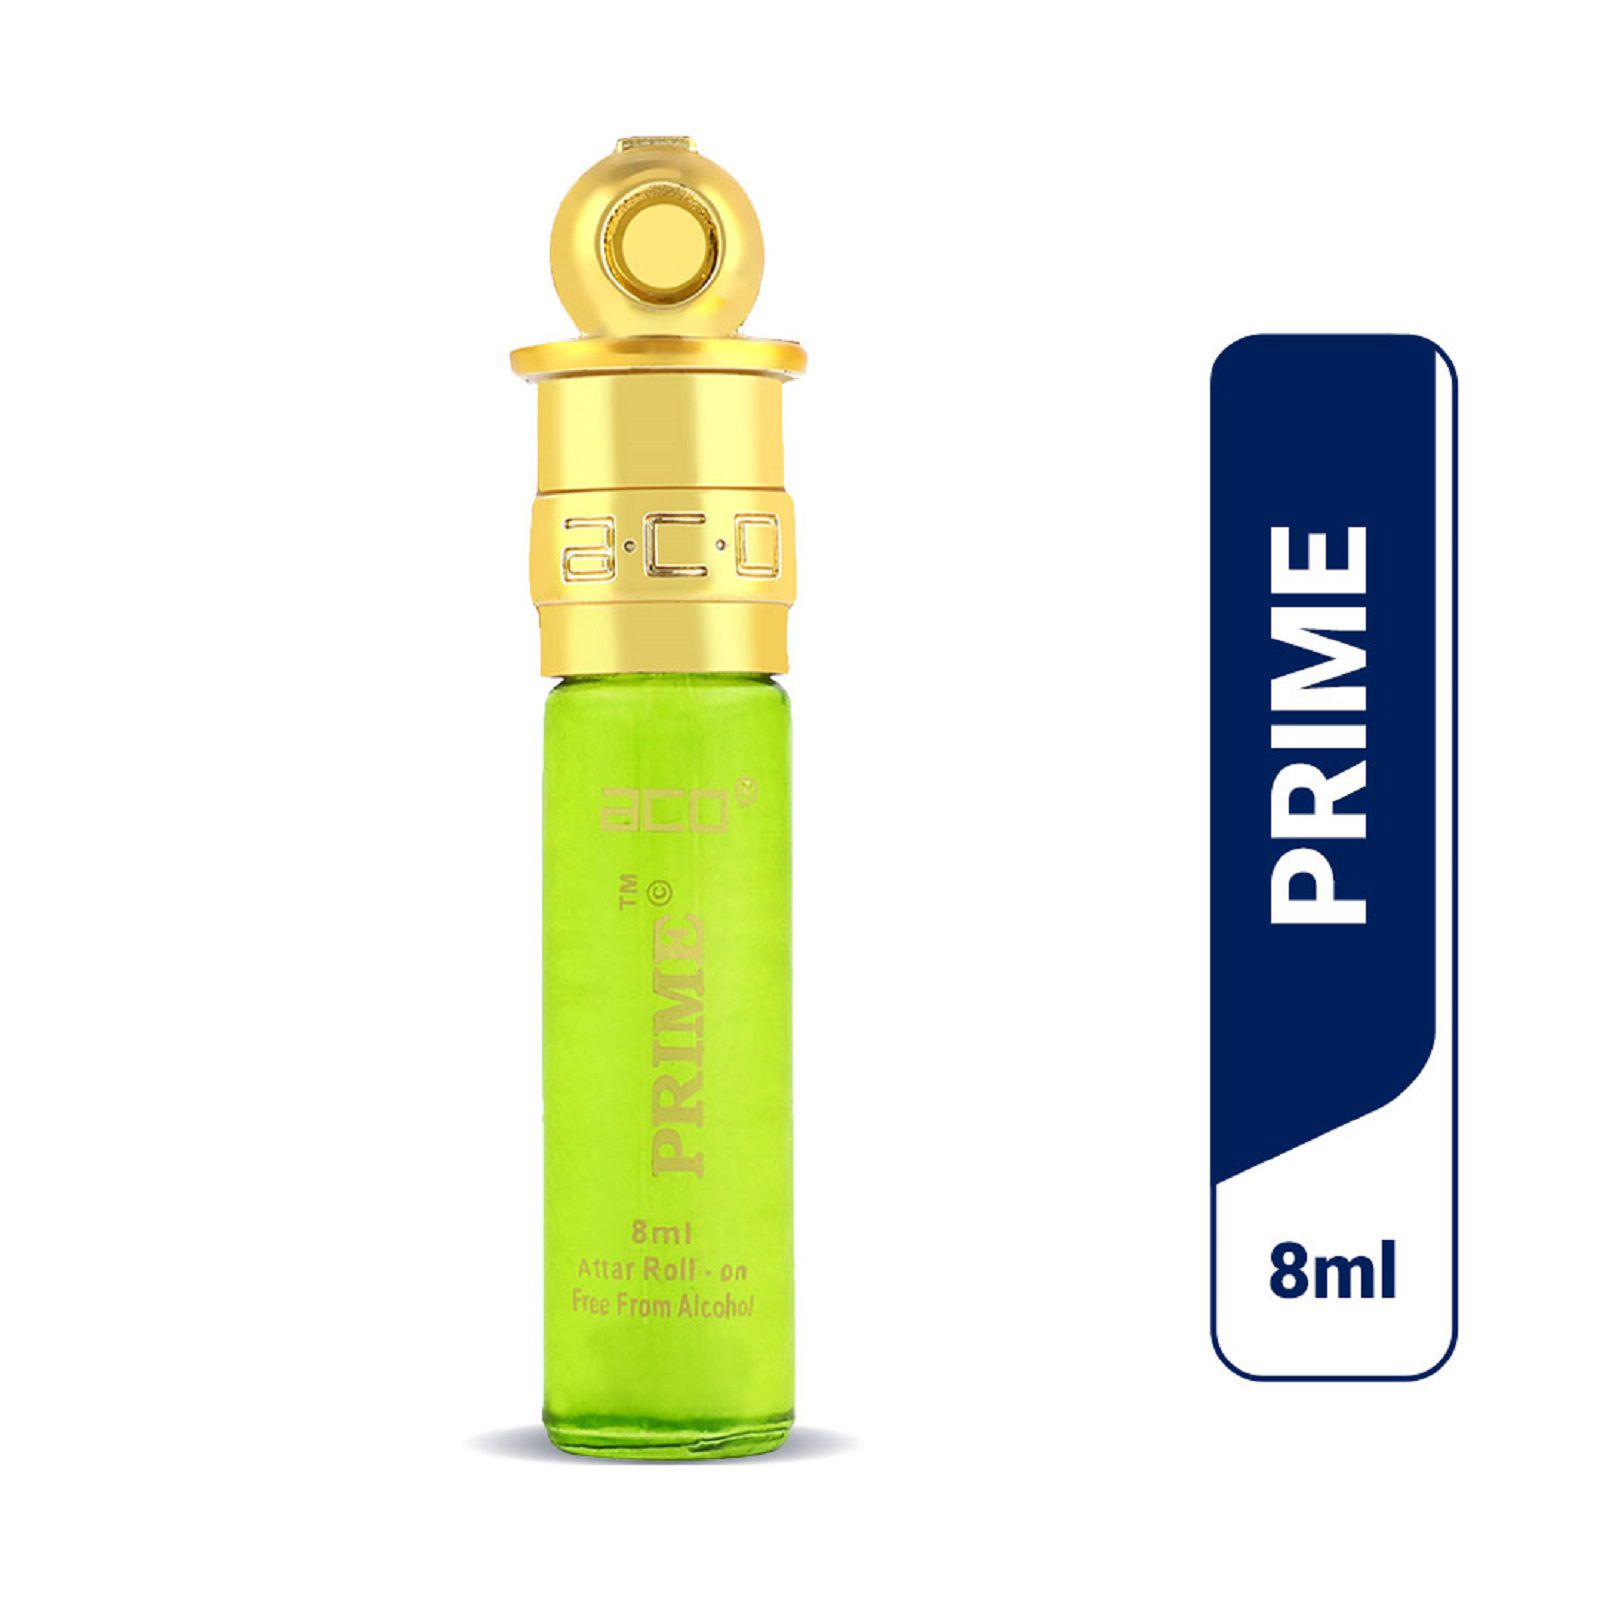     			aco perfumes PRIME   Concentrated  Attar Roll On 8ml